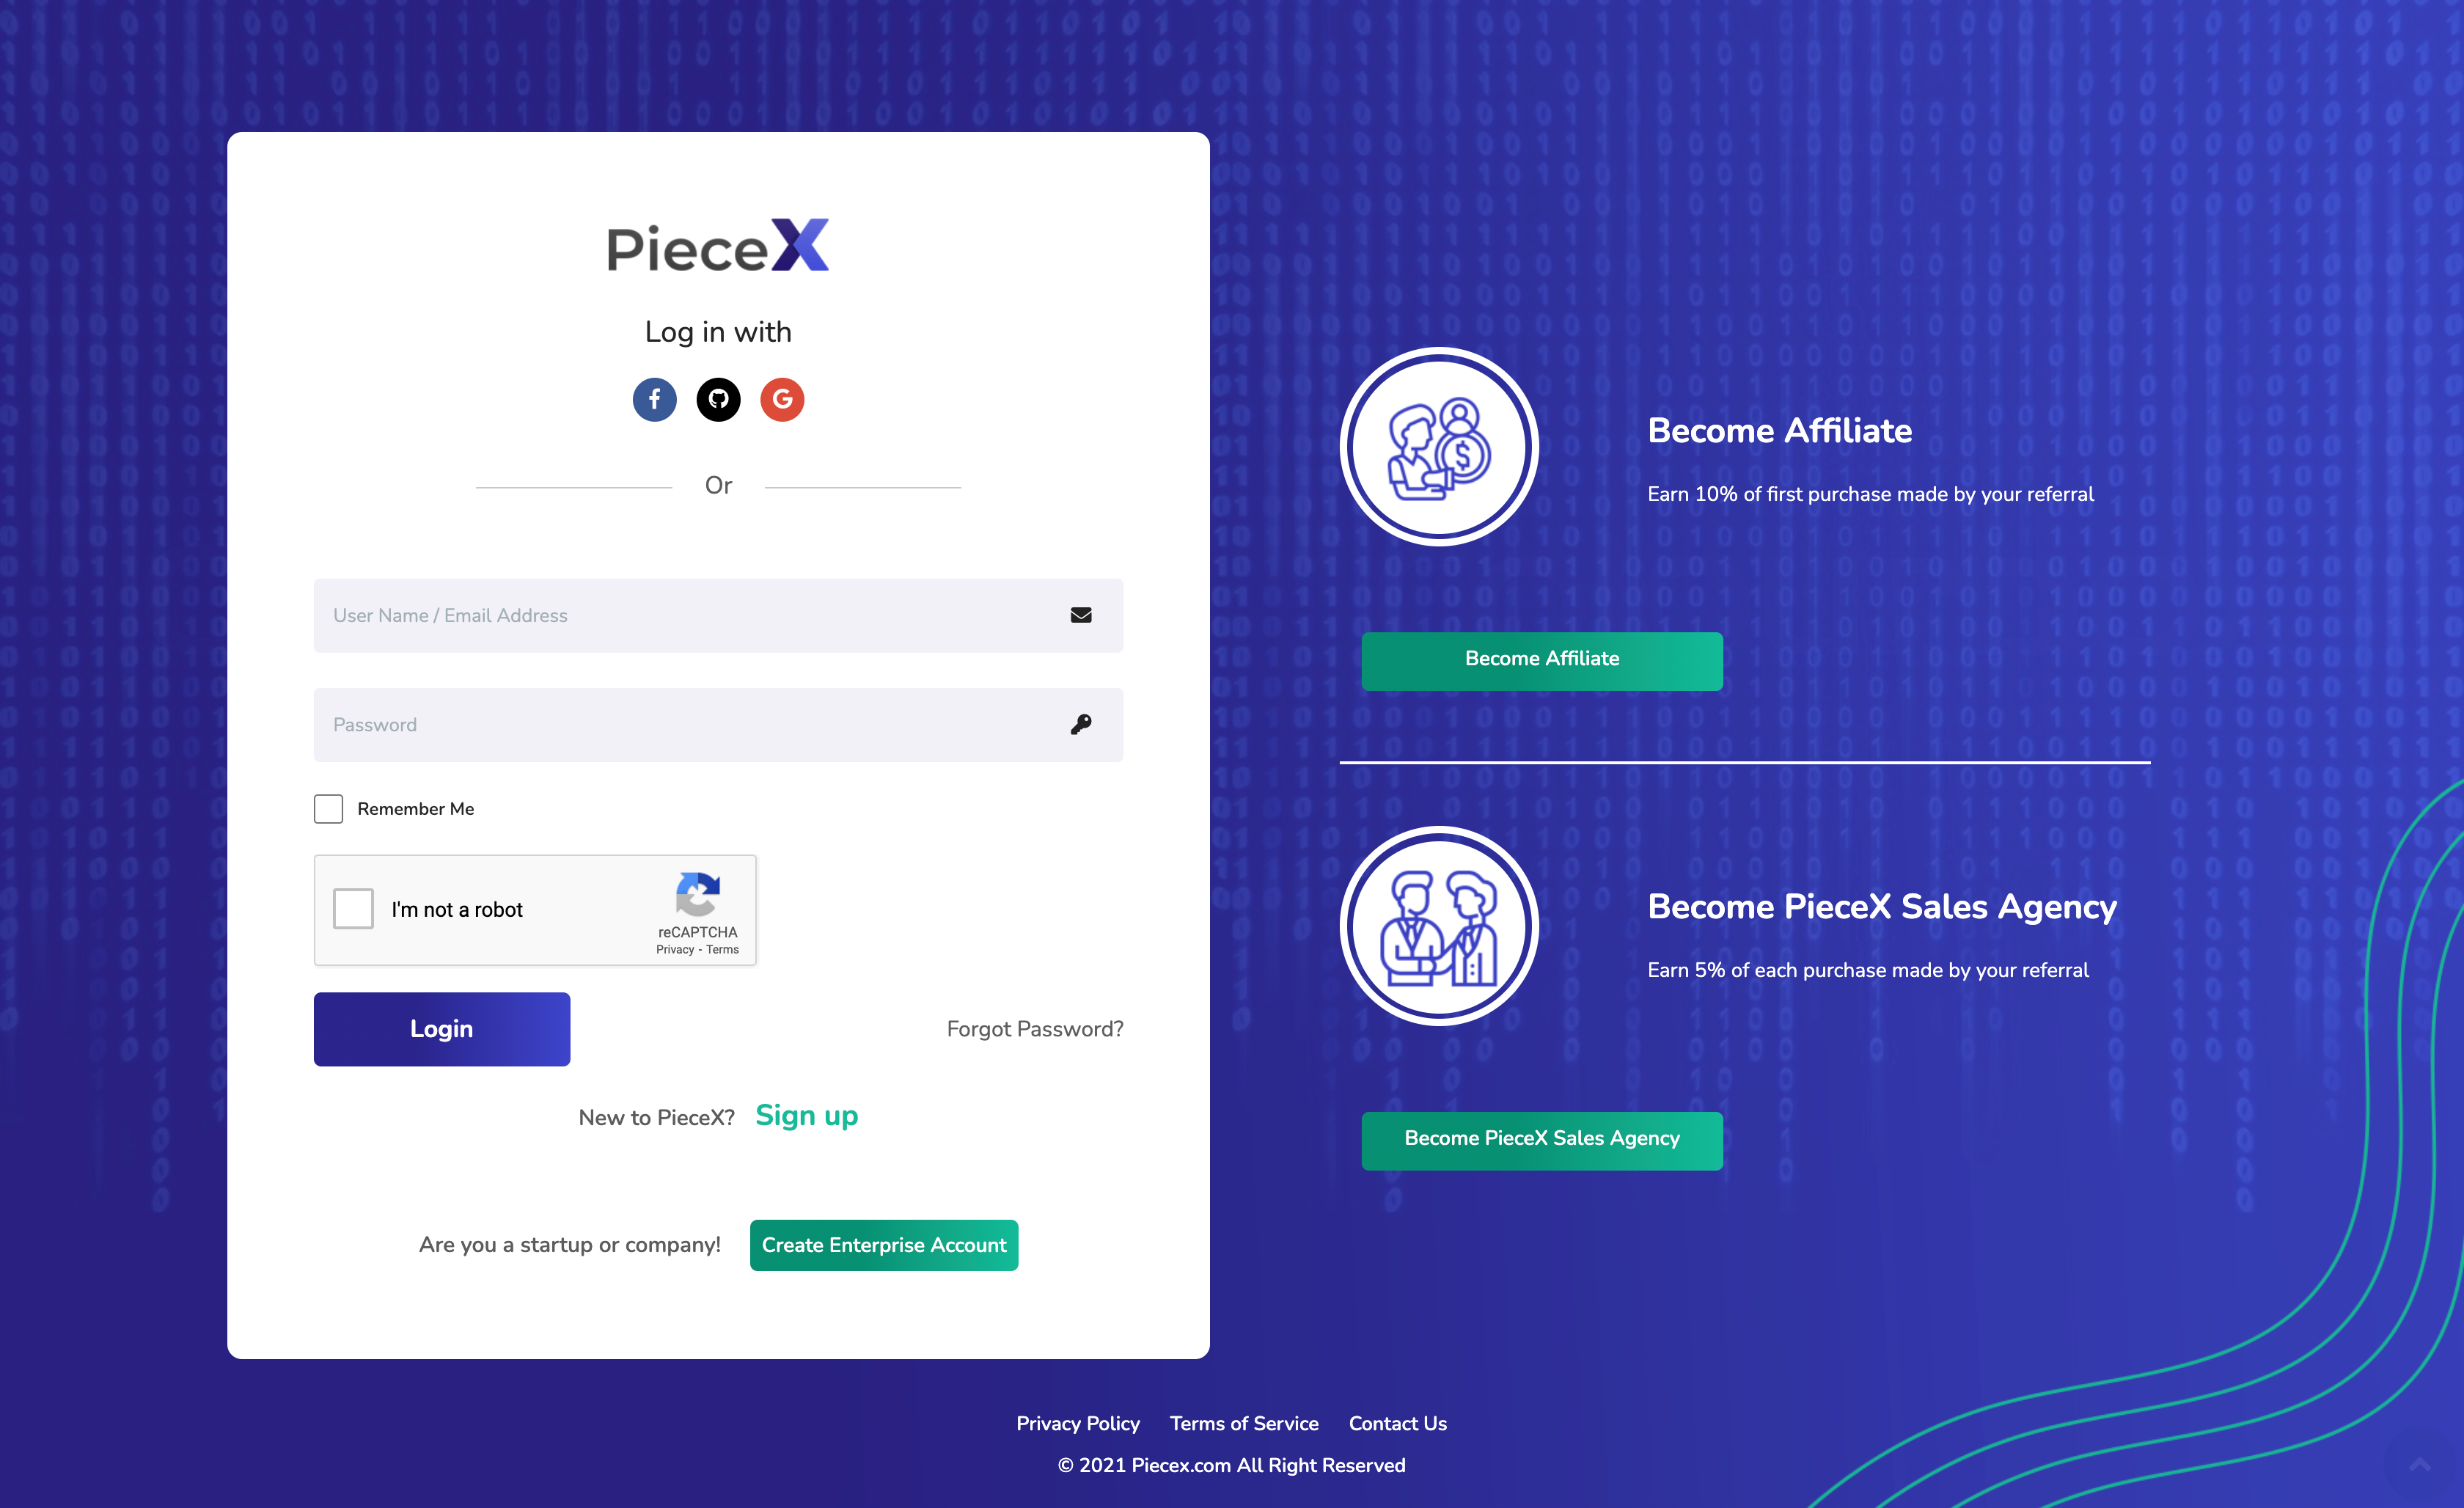 PieceX Log In Page used to sell software source code